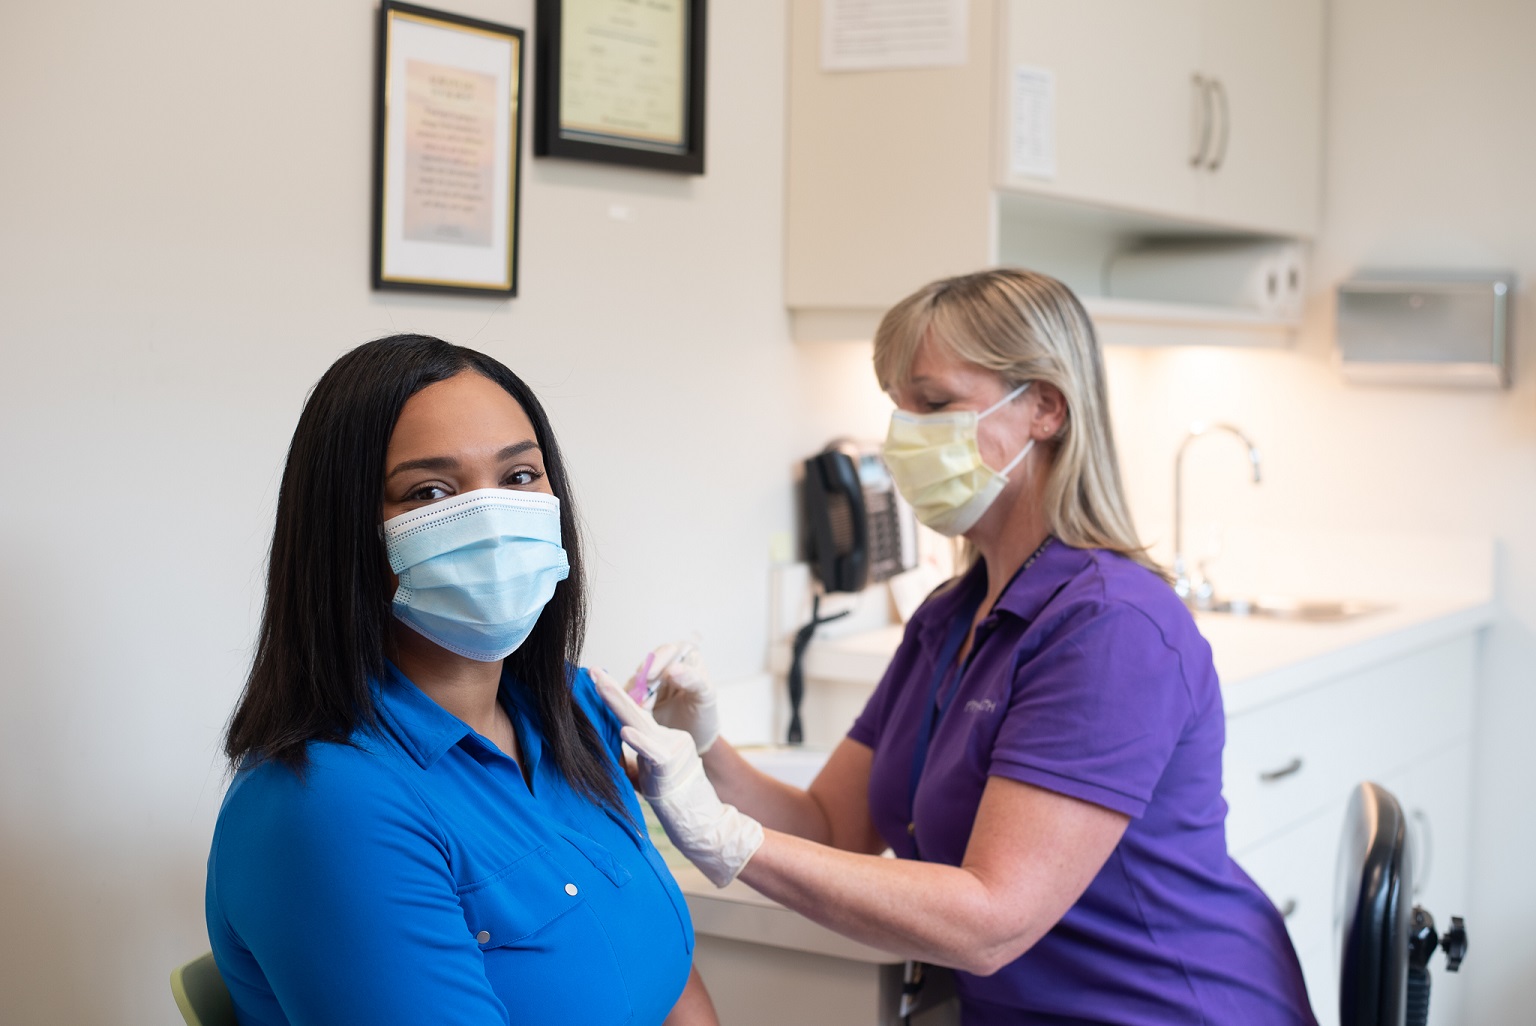 A brunette wearing a blue shirt and surgical mask gets a flu shot from a blonde RVNAhealth nurse who is wearing a purple shirt and a face mask